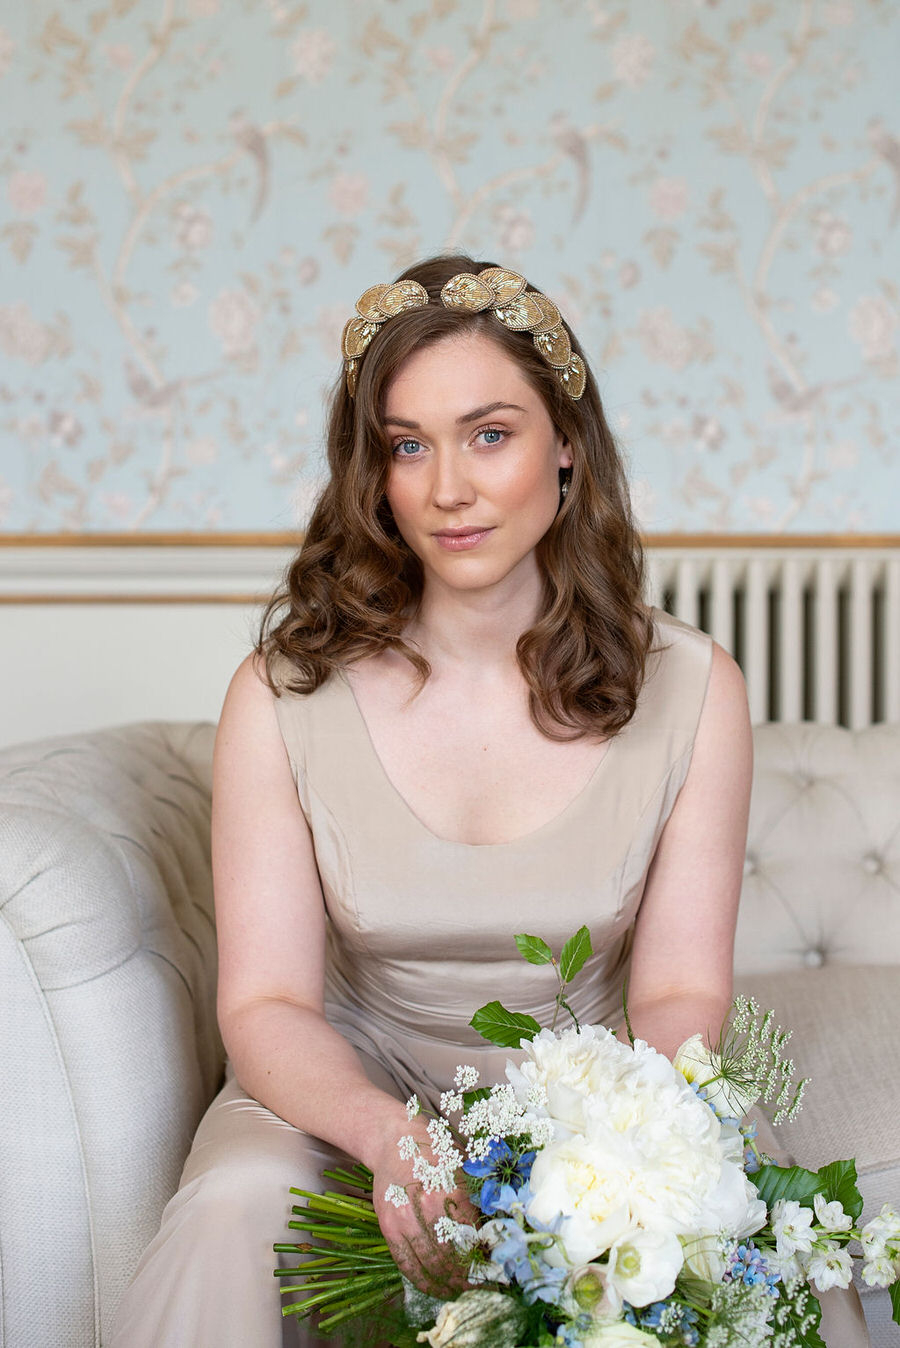 Pynes House wedding styling ideas with Ailsa Munro, Sarah Shuttle and Lottie Ettling PHotography (39)